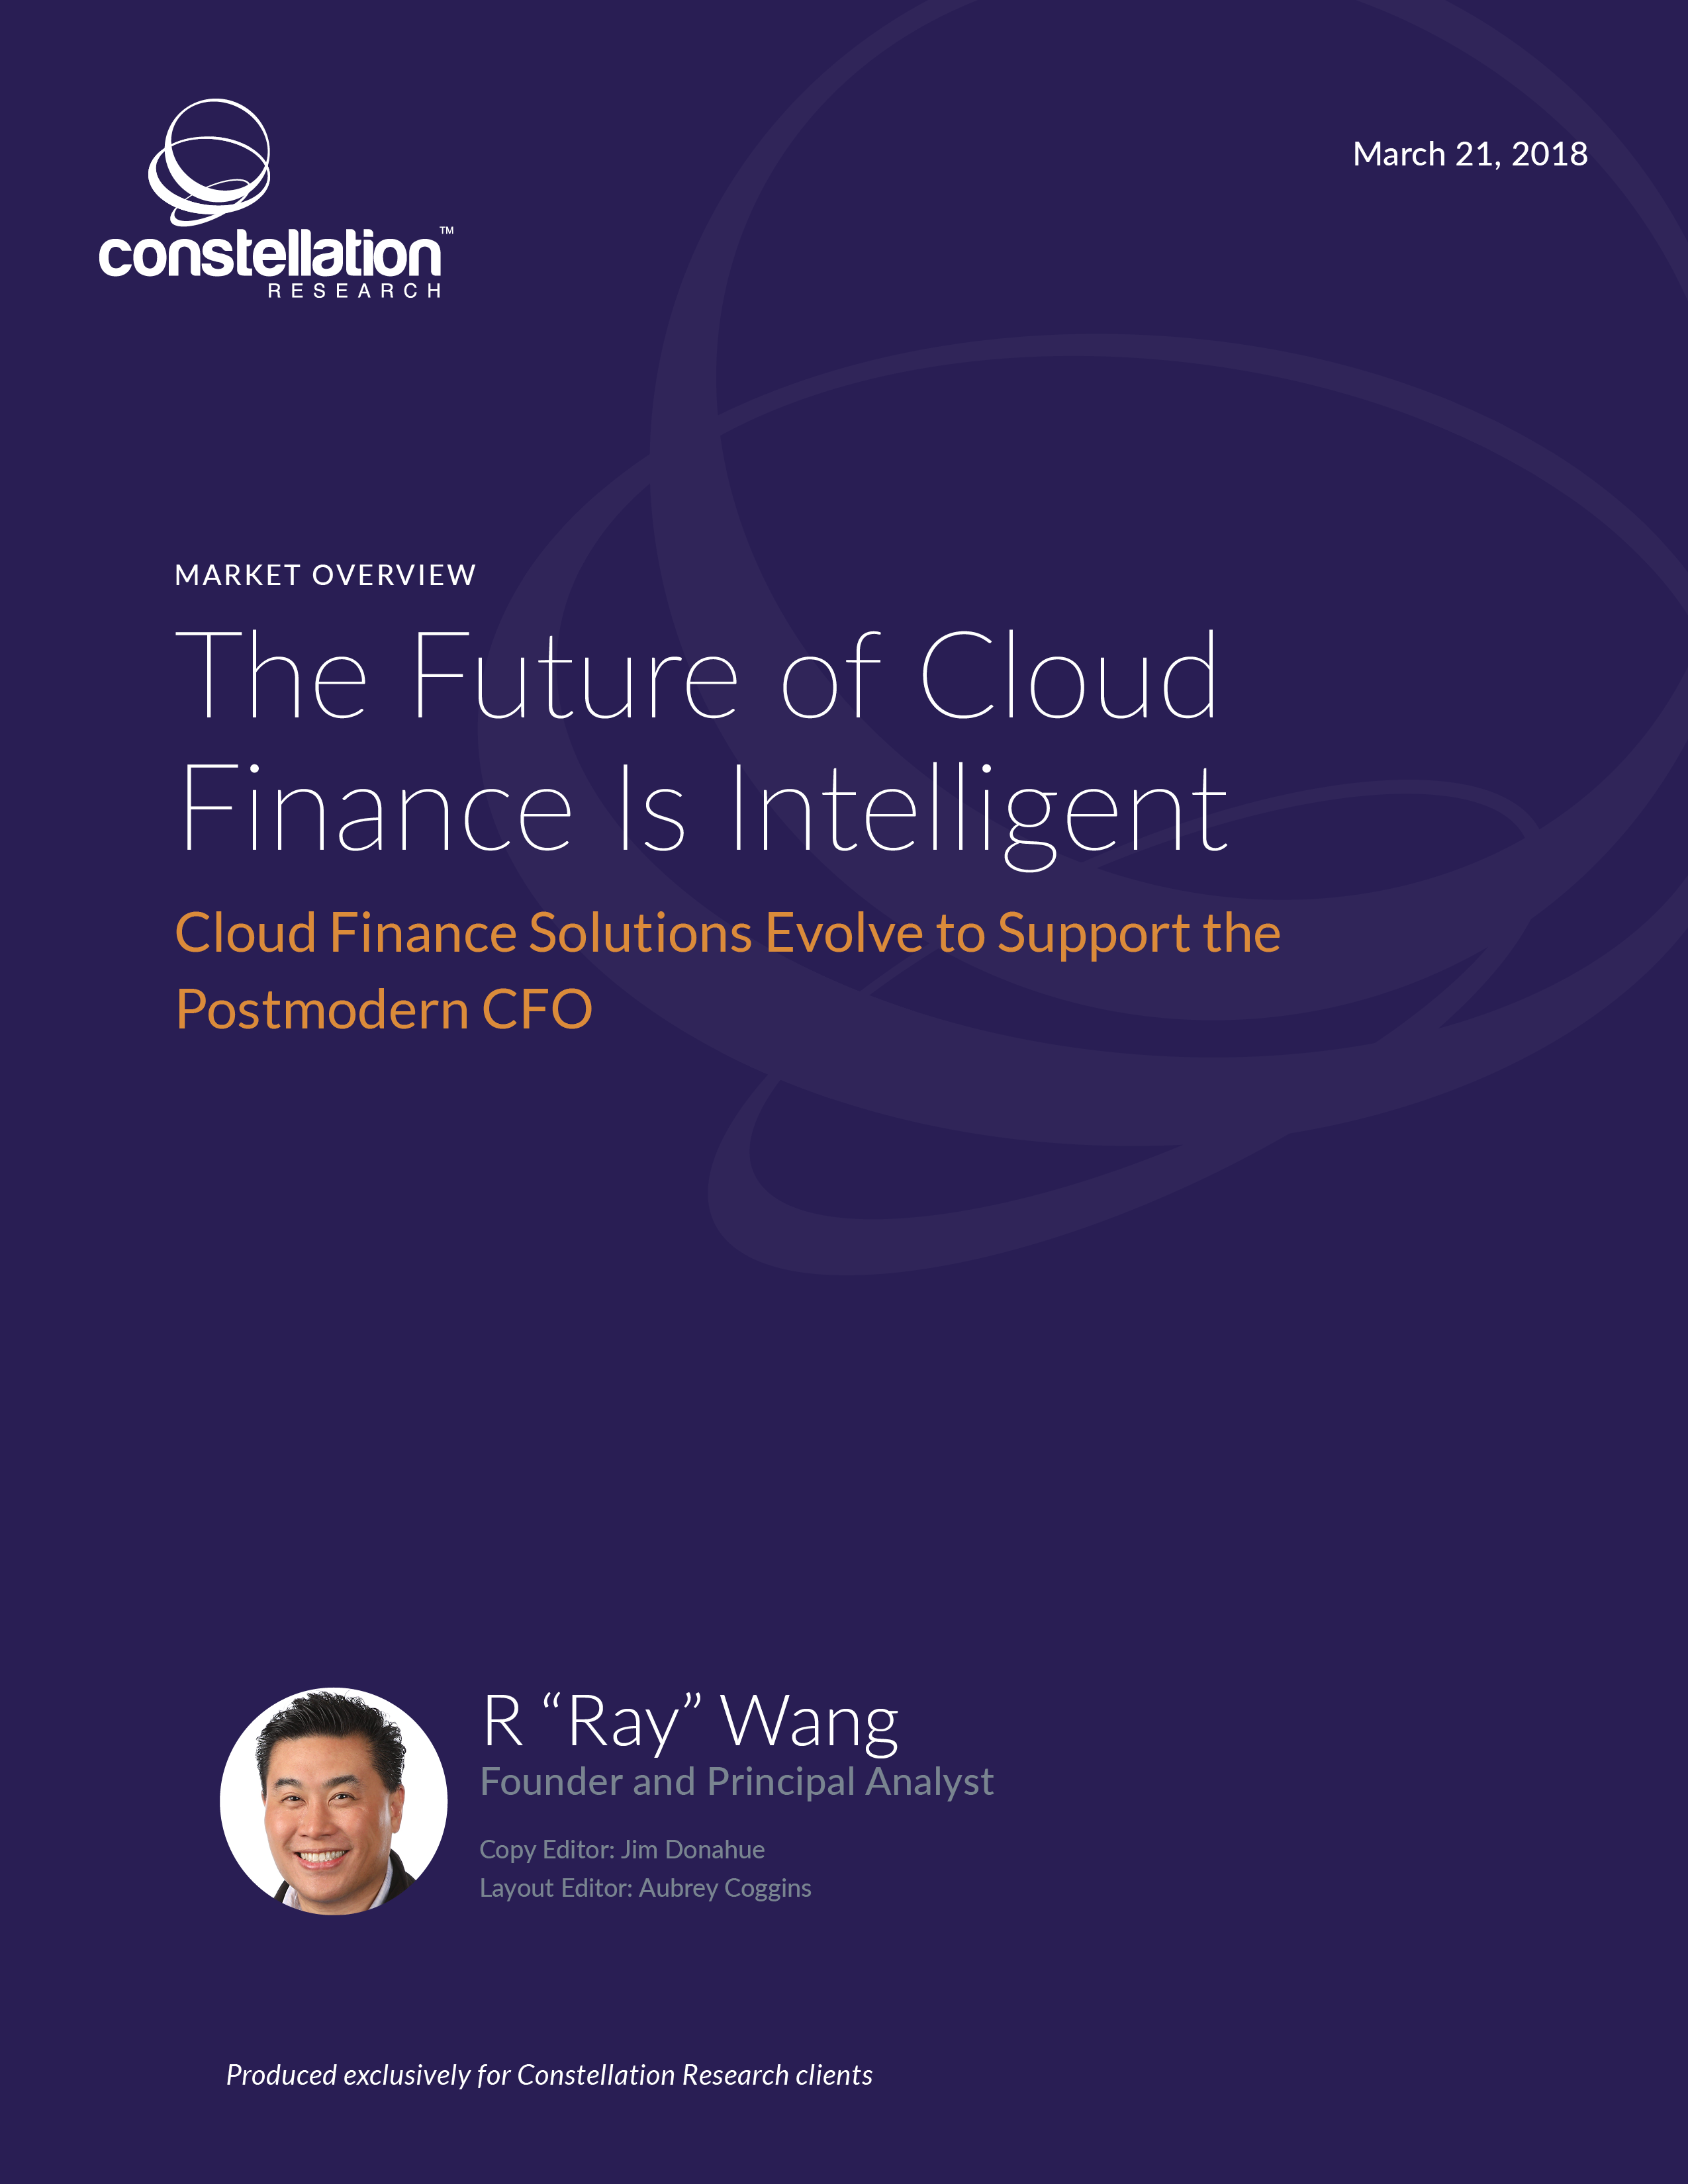 The Future of Cloud Finance Is Intelligent